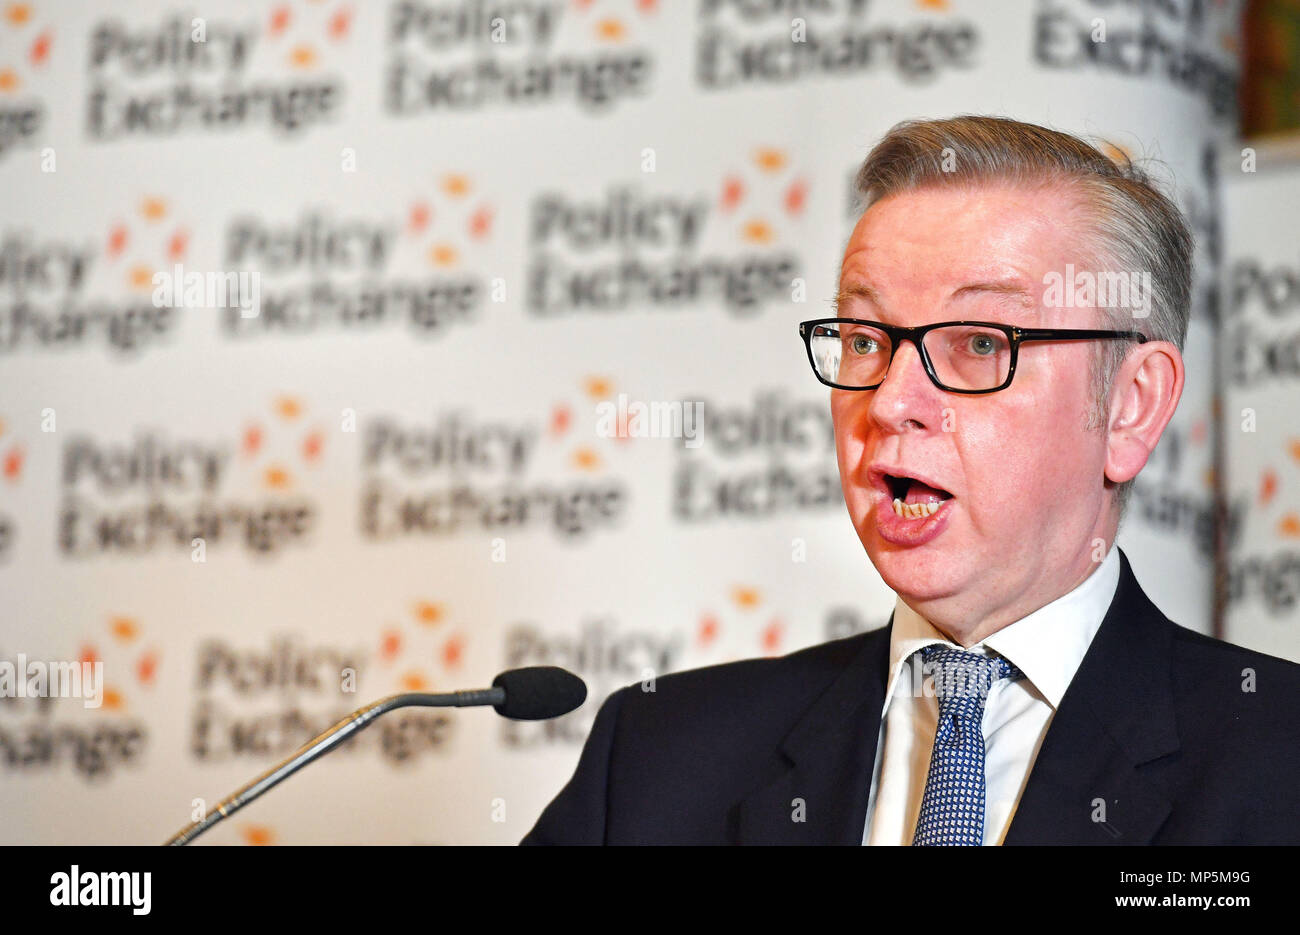 Michael Gove, Secretary of State for Environment, Food and Rural Affairs, speaks at a Policy Exchange conference titled The Union and Unionism - Past, Present and Future, in central London. Stock Photo